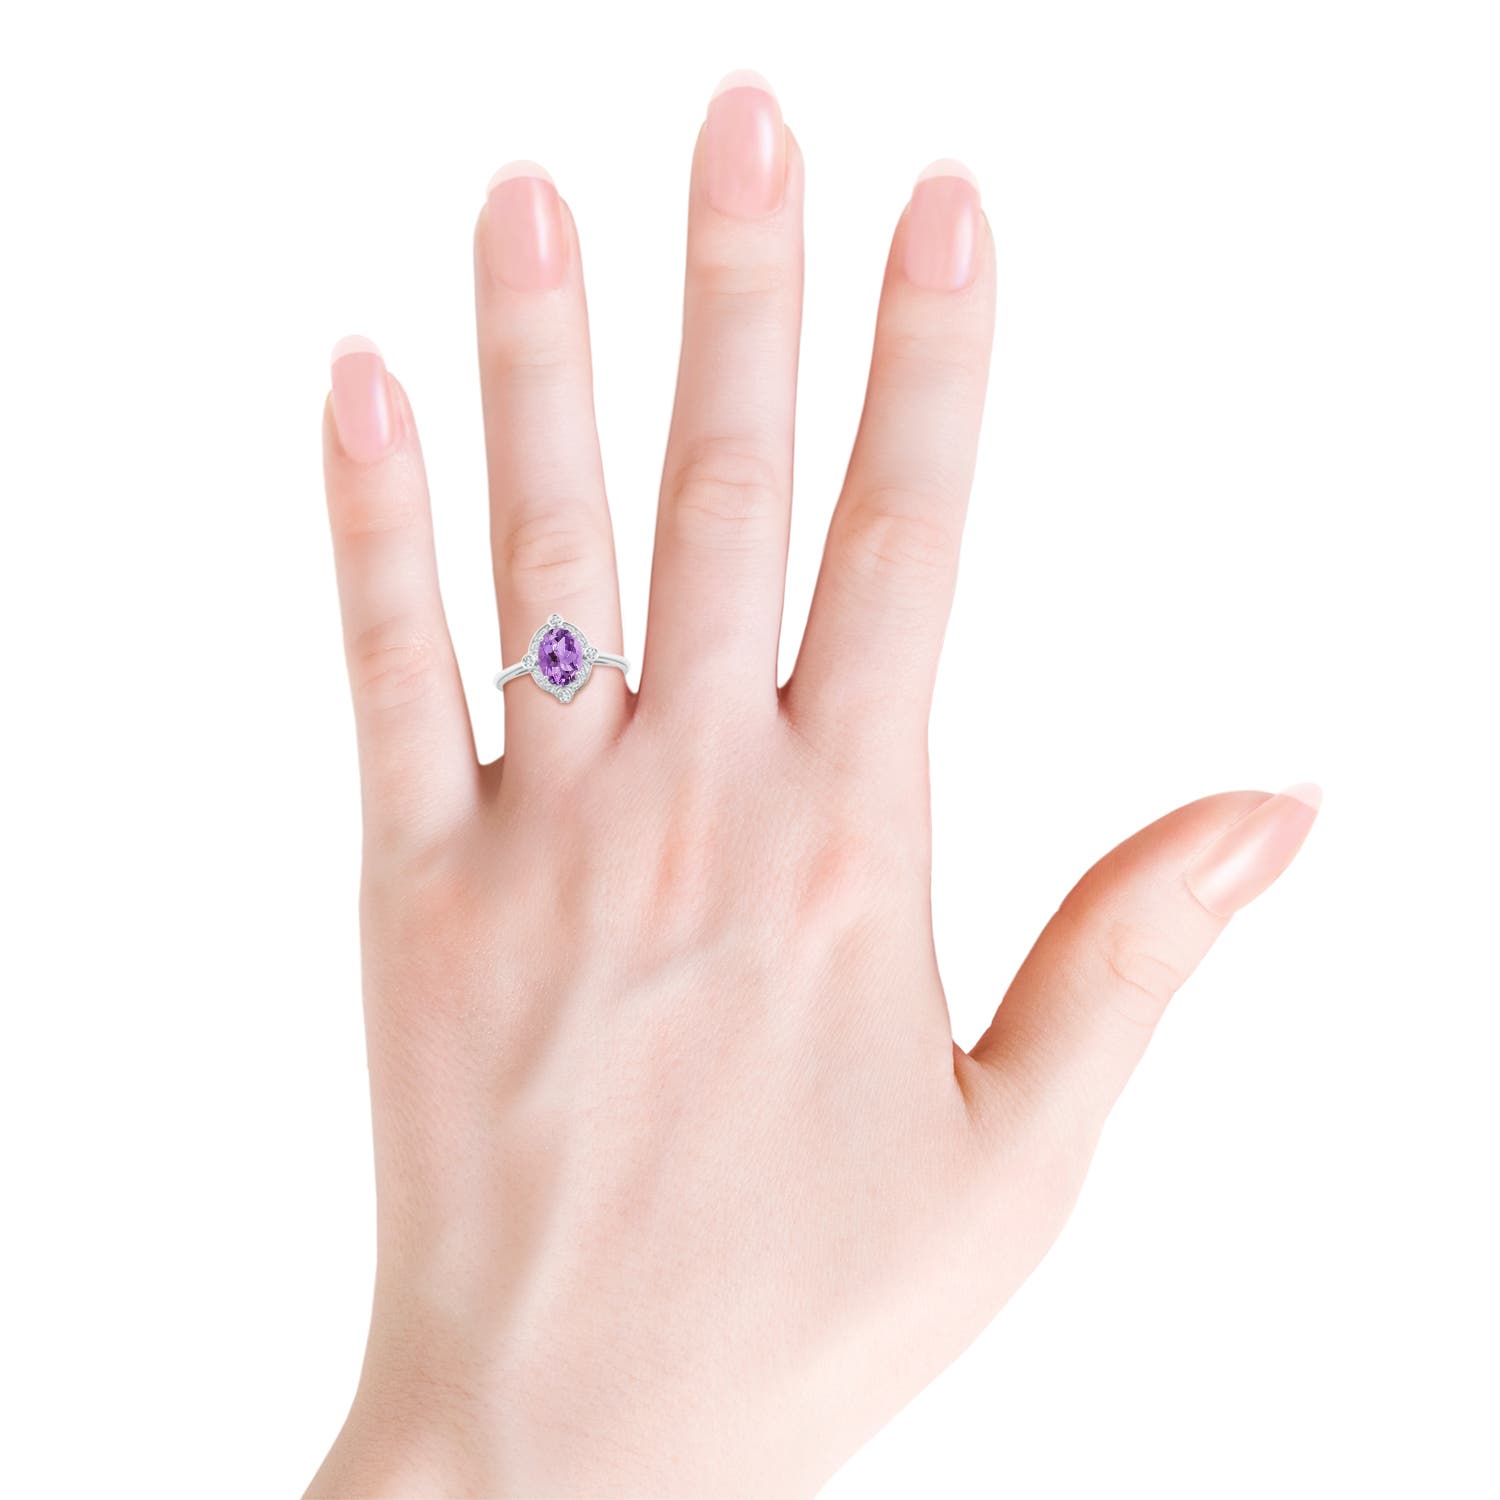 A - Amethyst / 1.29 CT / 14 KT White Gold